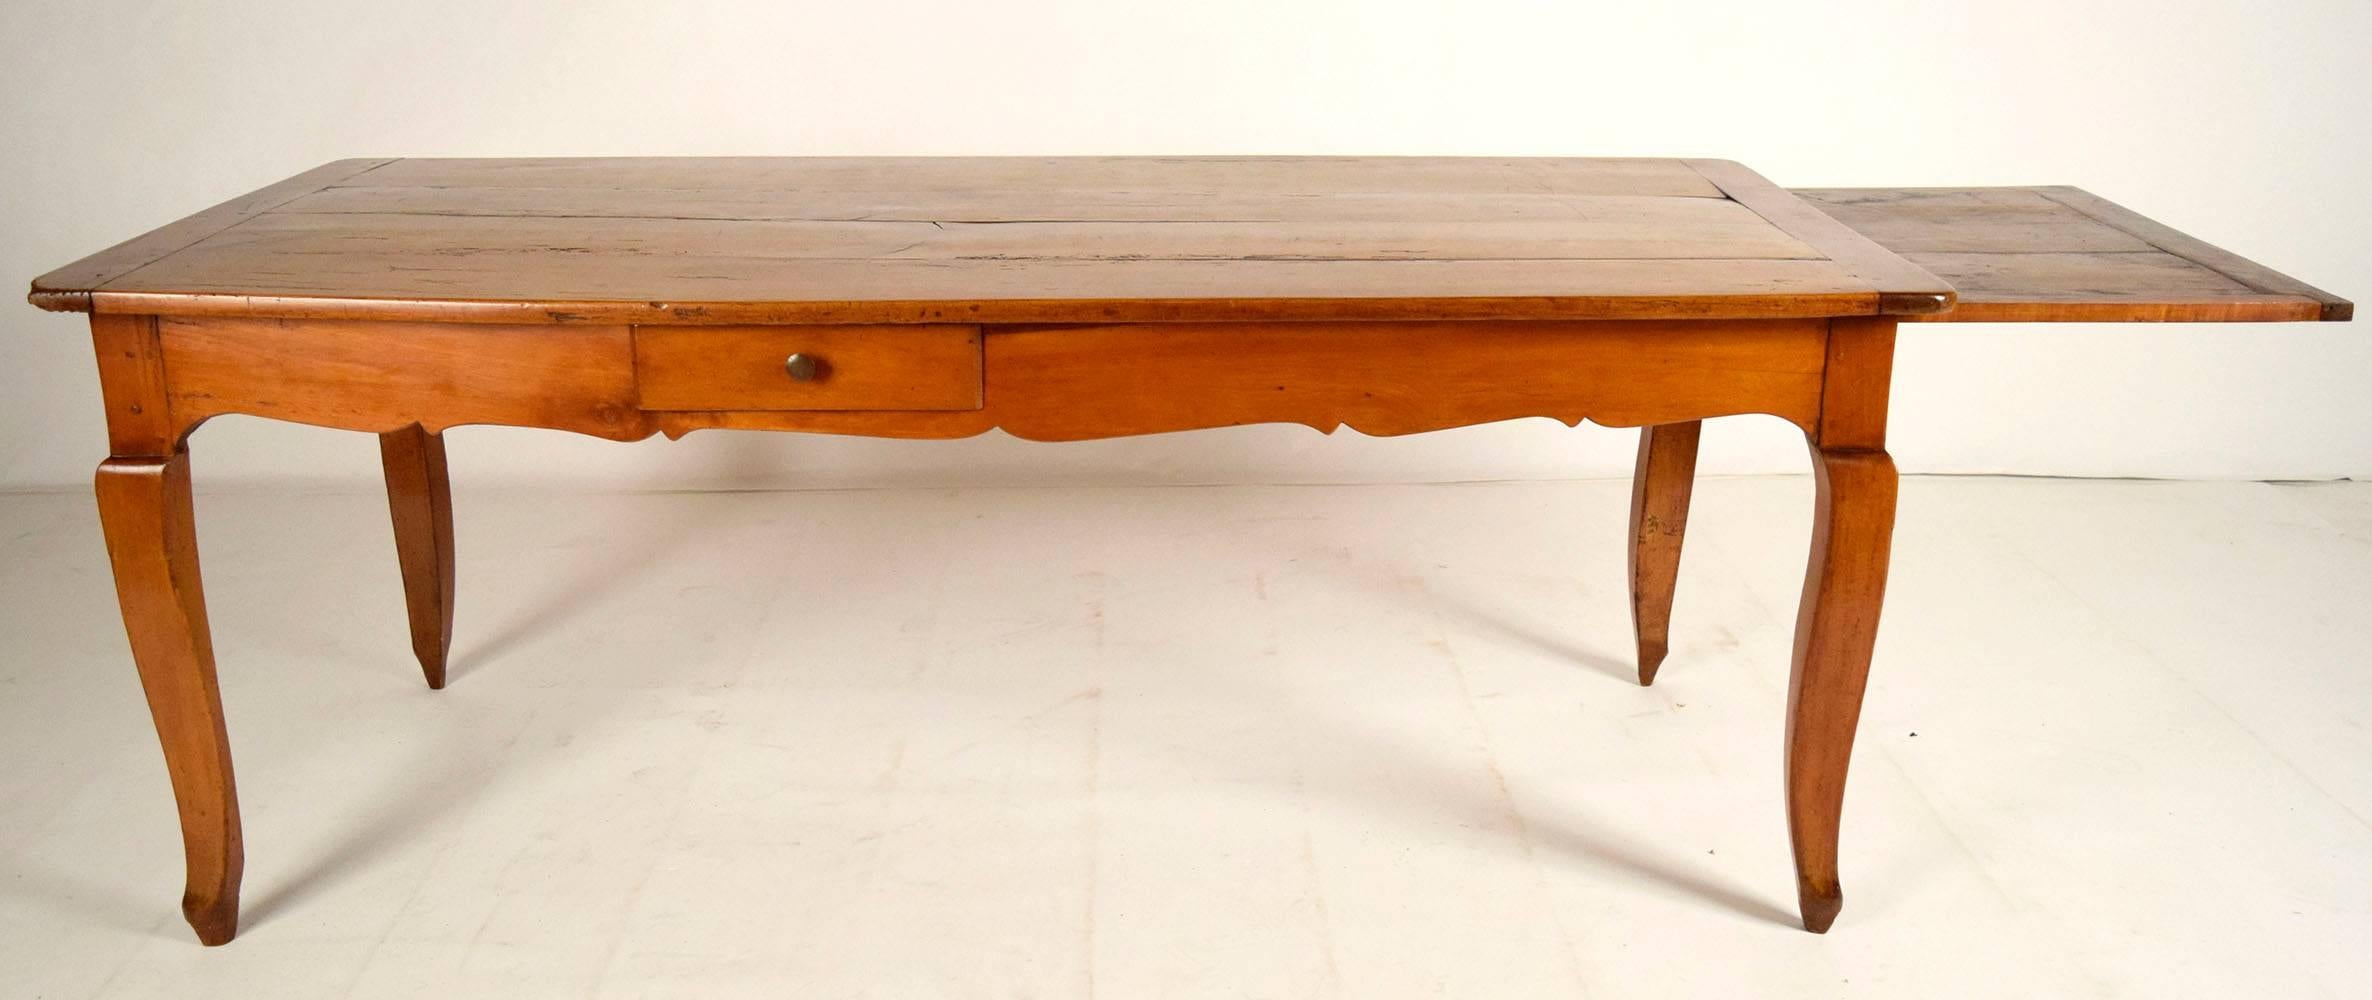 Patinated French Walnut Early 19th Century Provincial Farm Dining Table